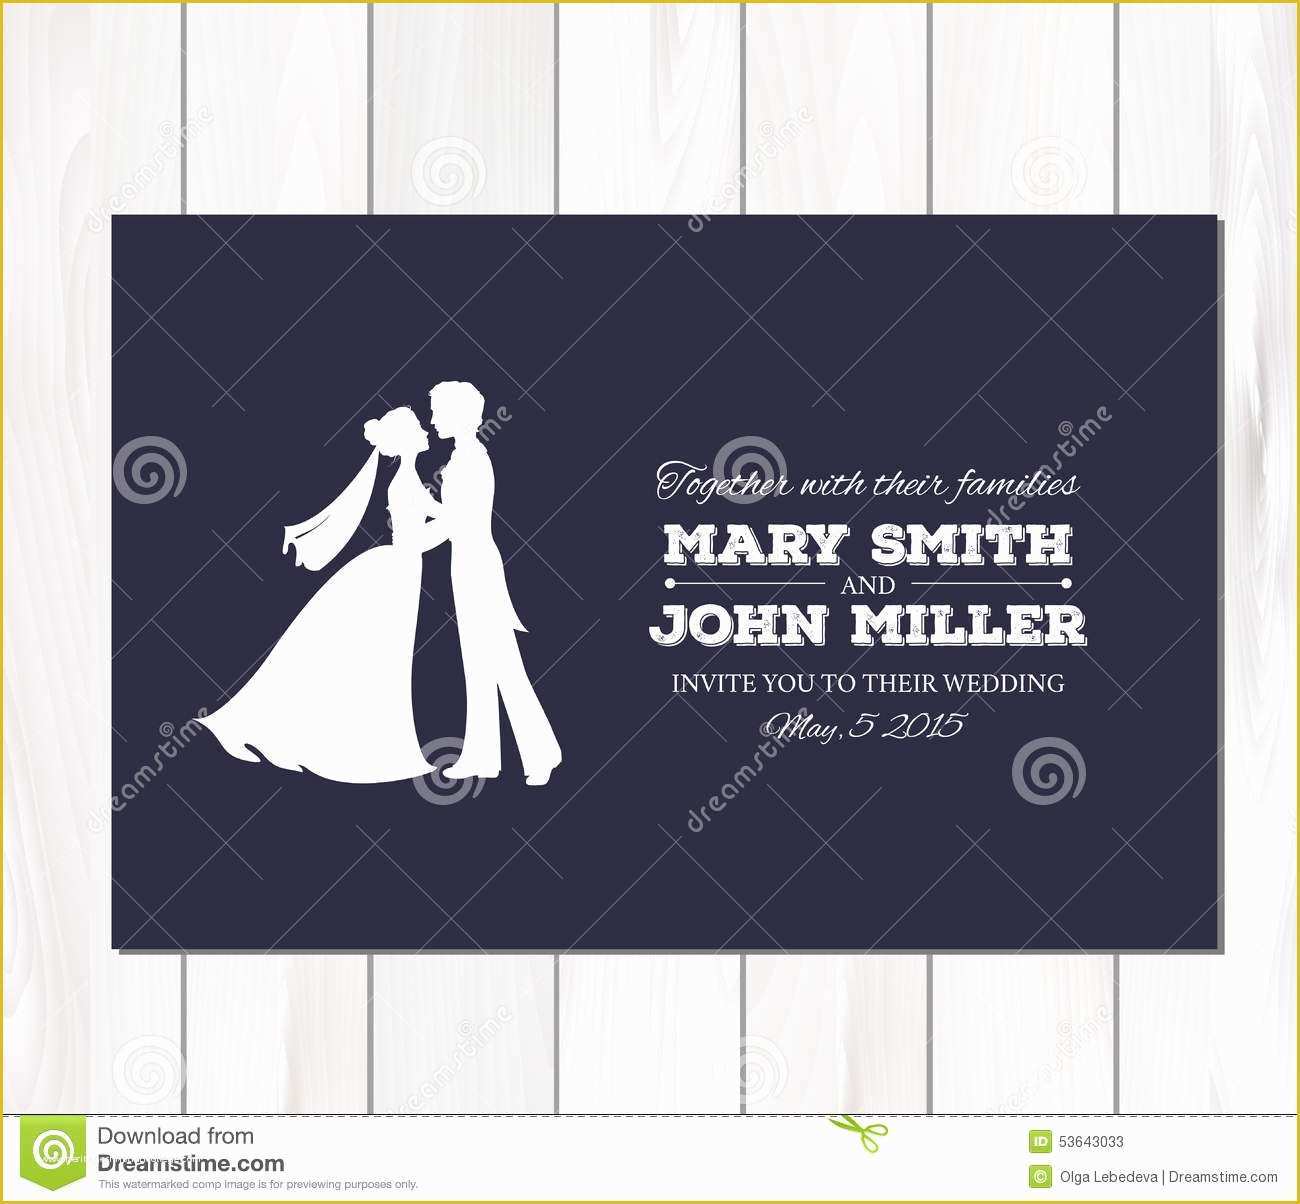 Free Groomsman Card Template Of Vector Wedding Invitation with Profile Silhouettes Stock